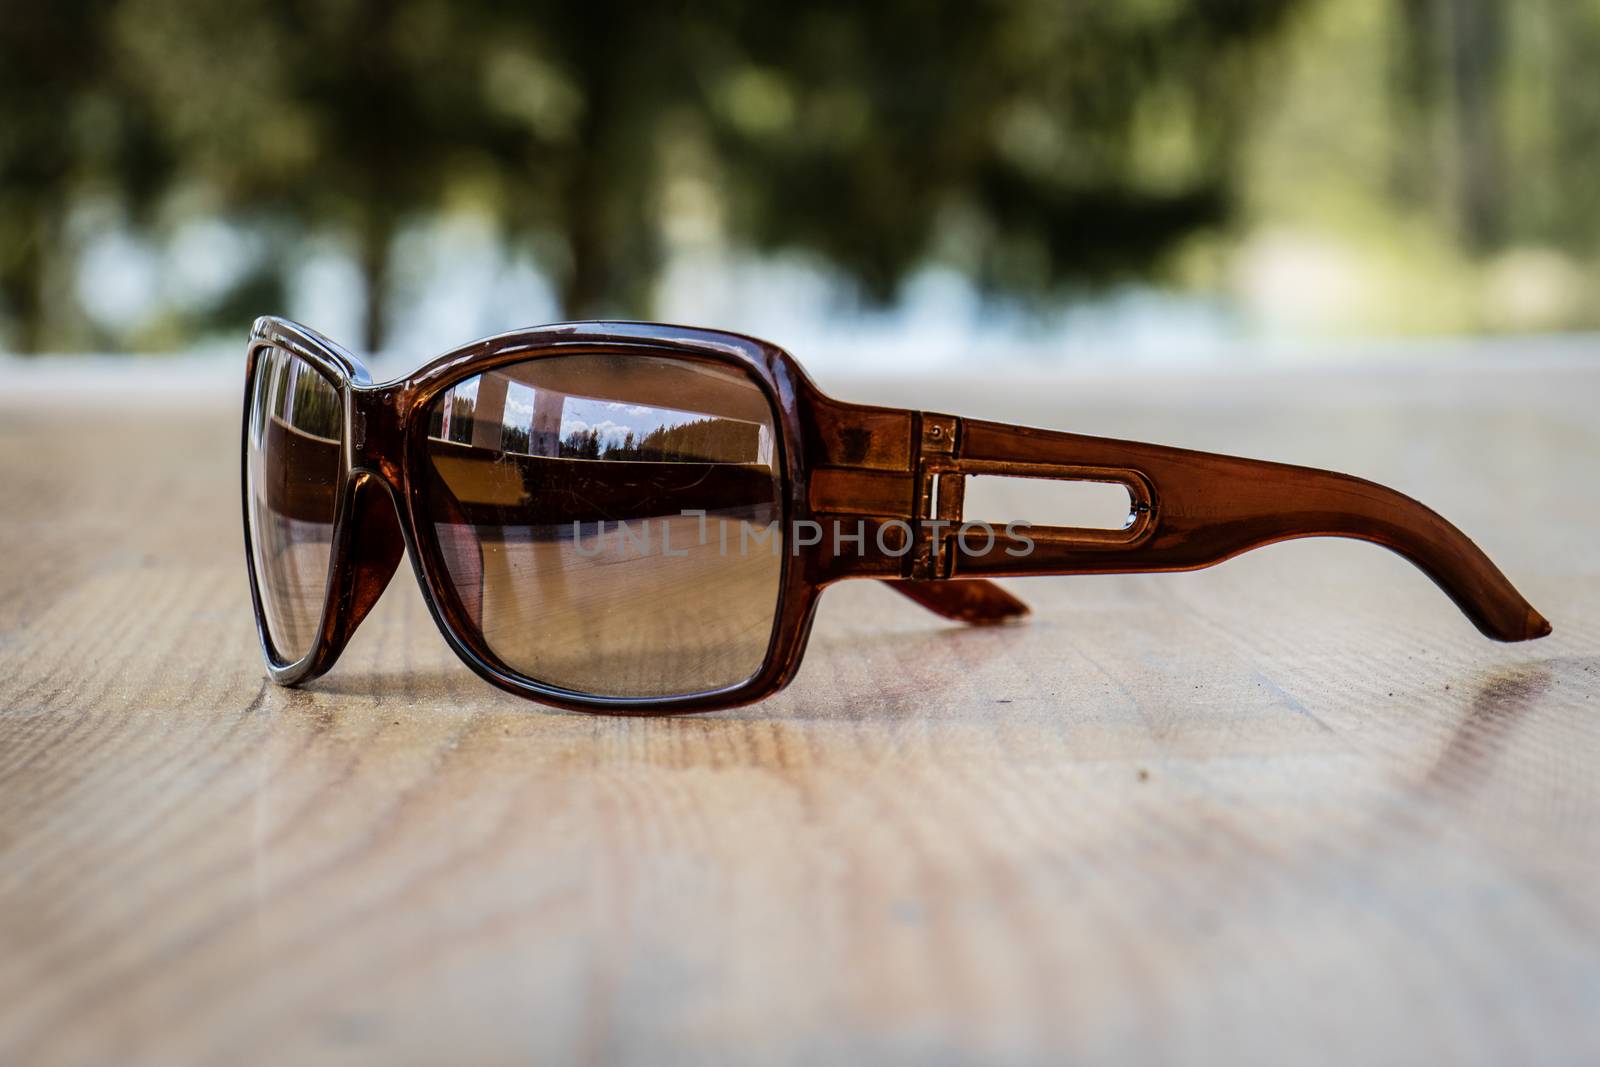 Sunglasses on the table in the sun on a wooden table by wytrazek